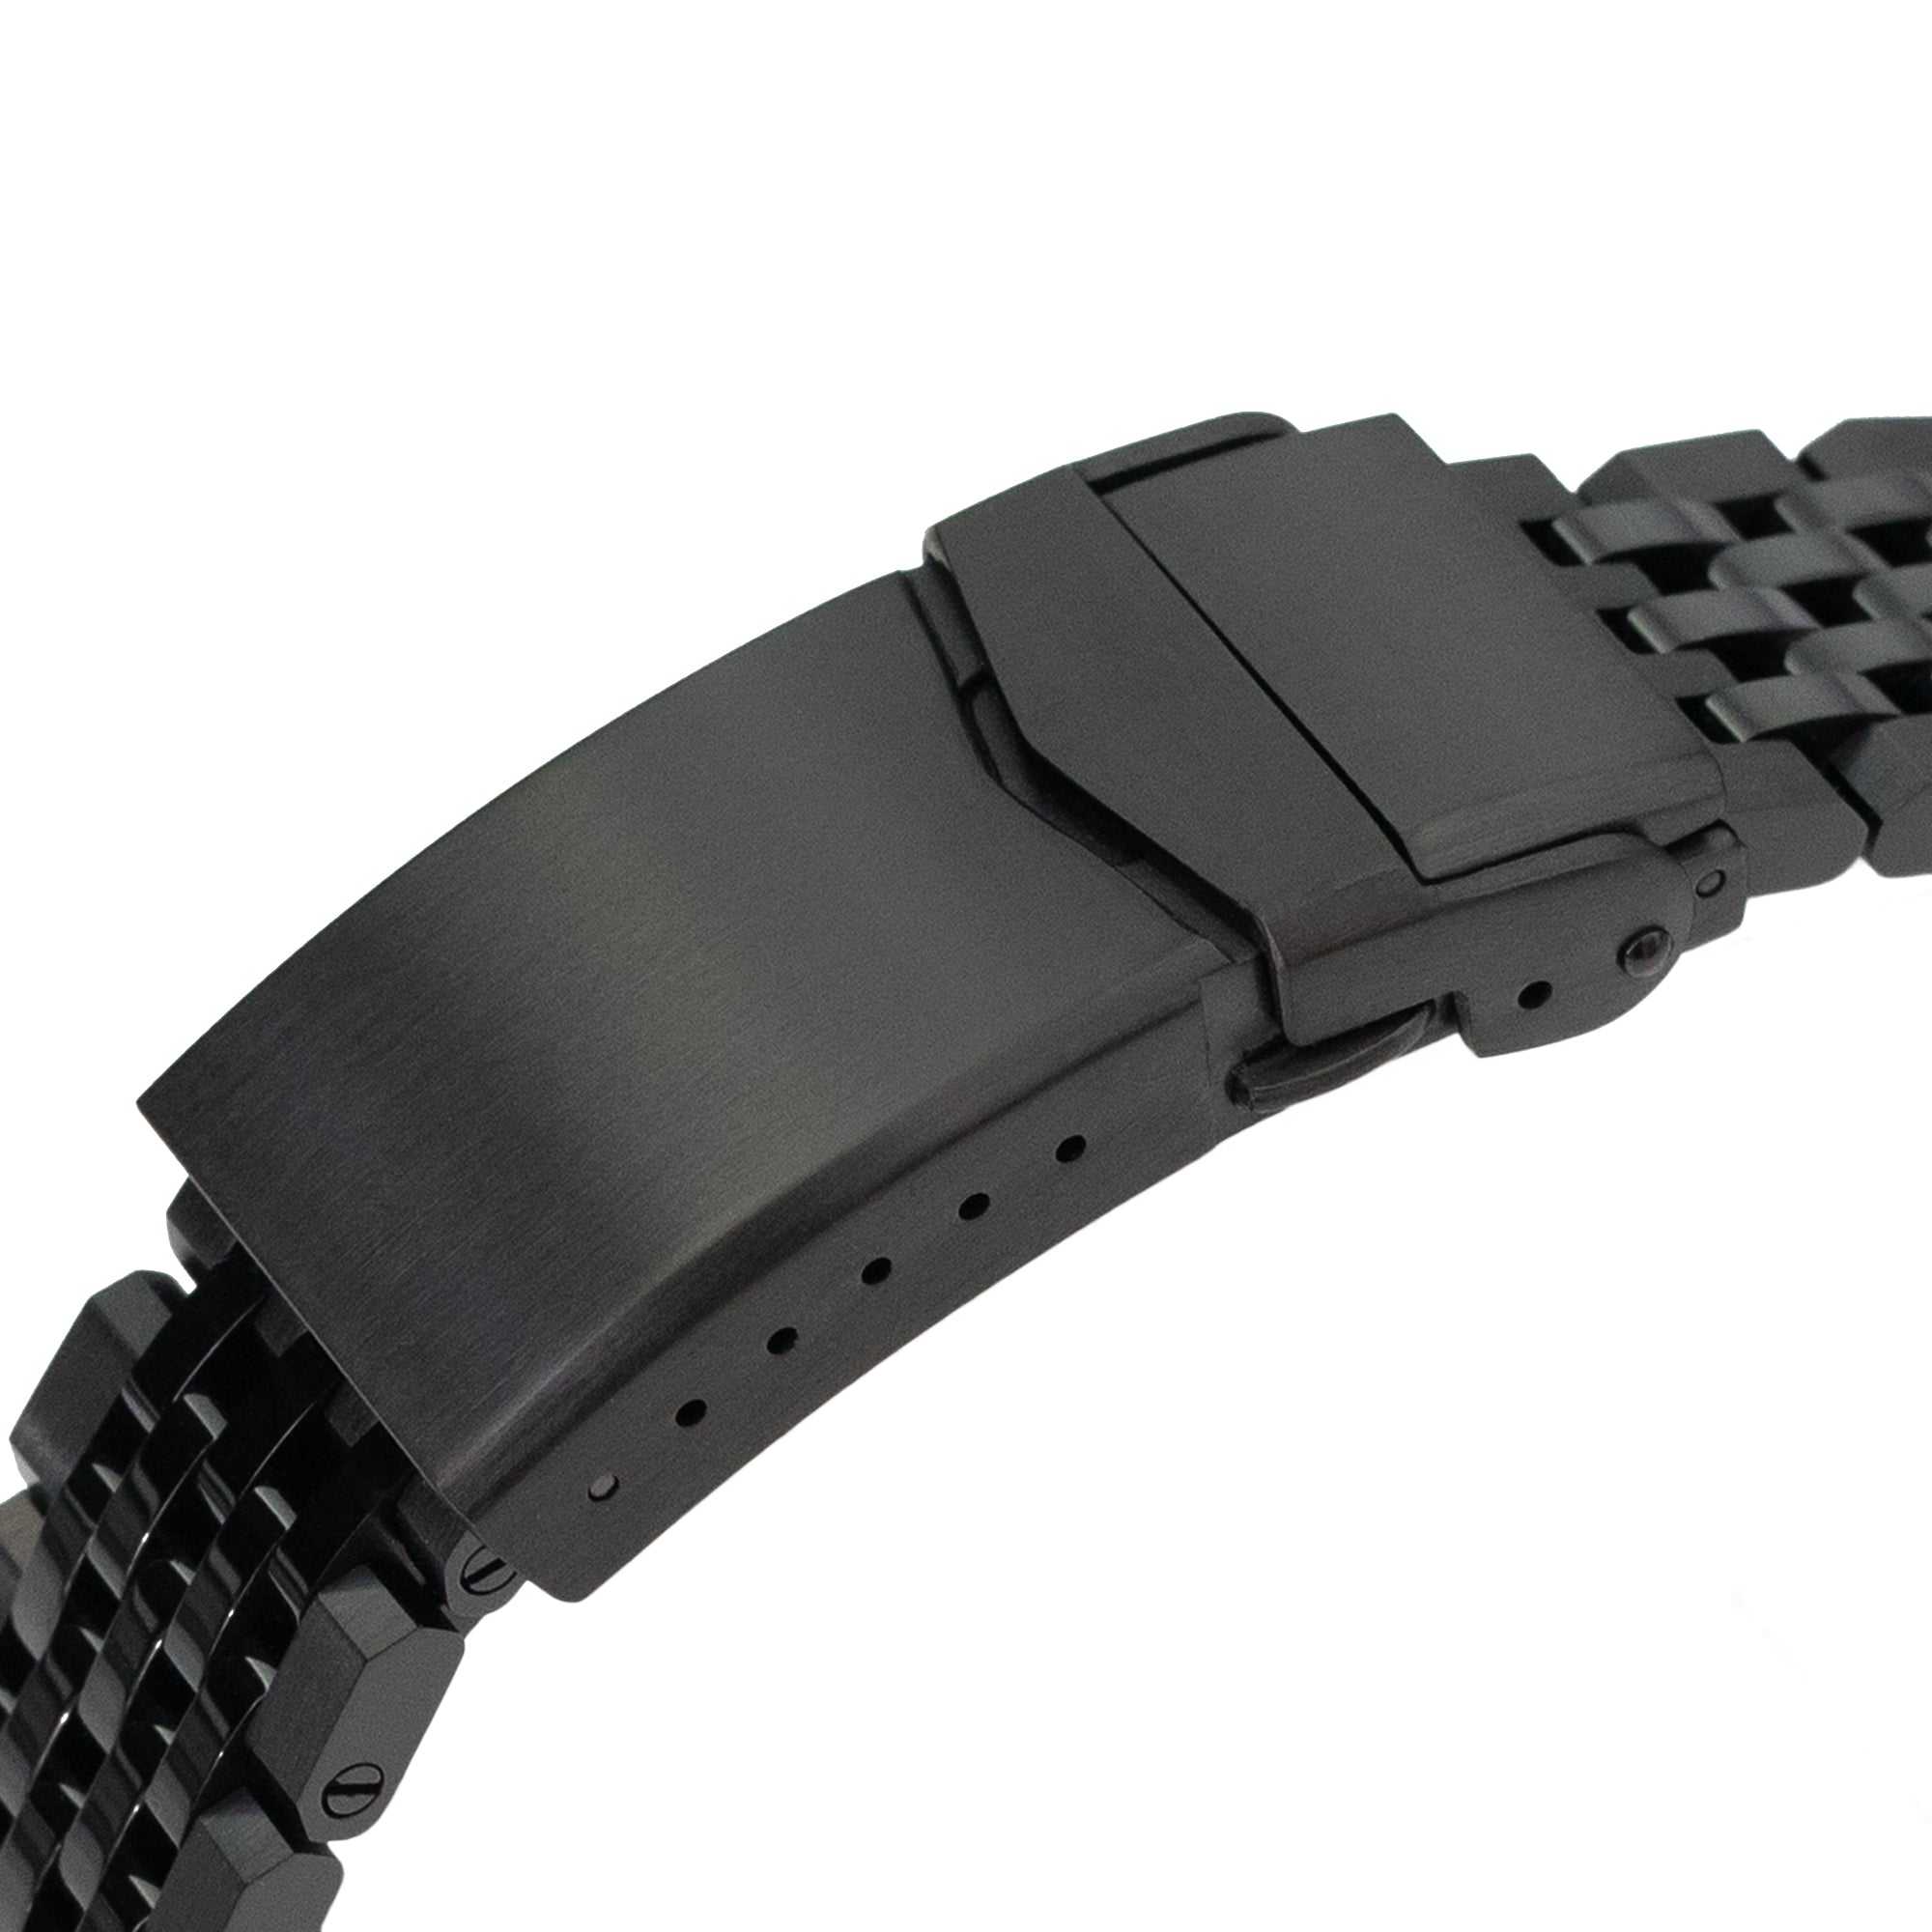 20mm Asteroid QR for Straight End Diamond-like Carbon (DLC coating) Strapcode Watch Bands